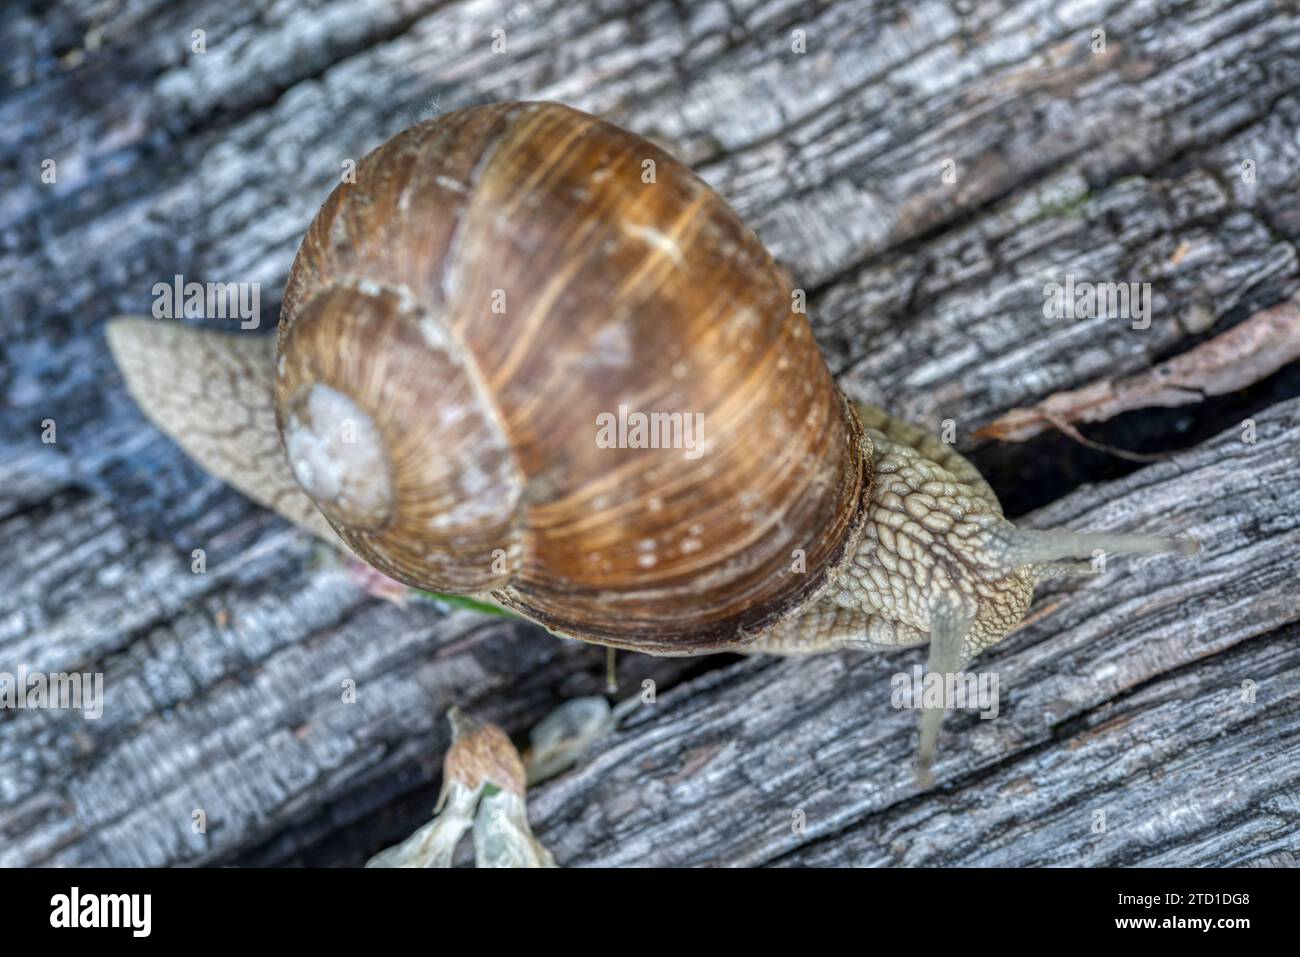 Helix pomatia also Roman snail or burgundy snail is a large air-breathing land snail. Pulmonary Gastropod Mollusk, family Helicidae stock photo Stock Photo